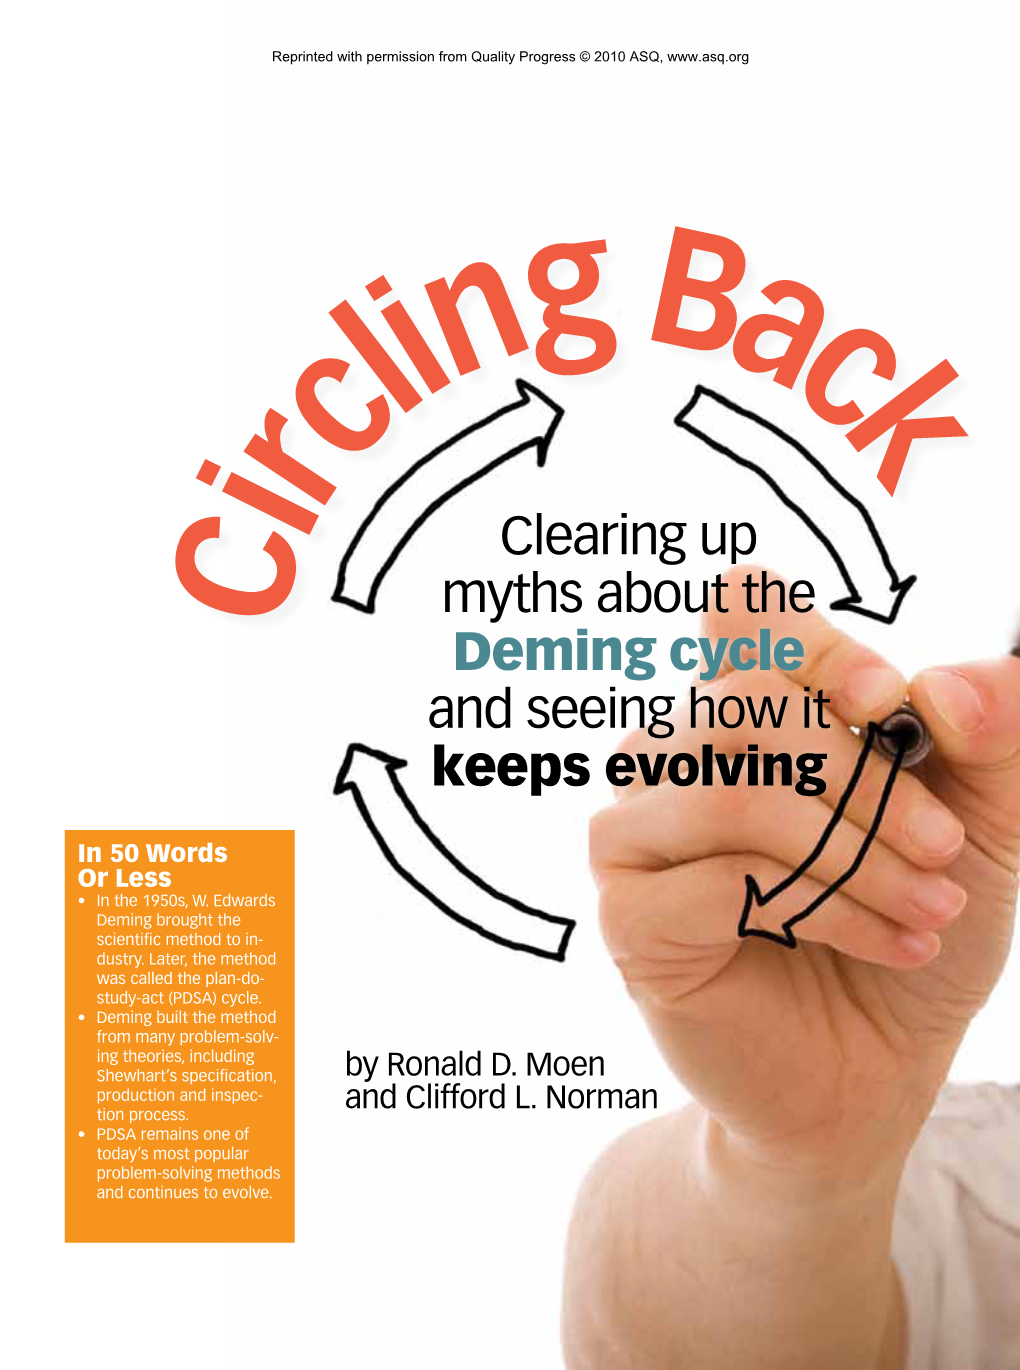 Clearing up Myths About the Deming Cycle and Seeing How It Keeps